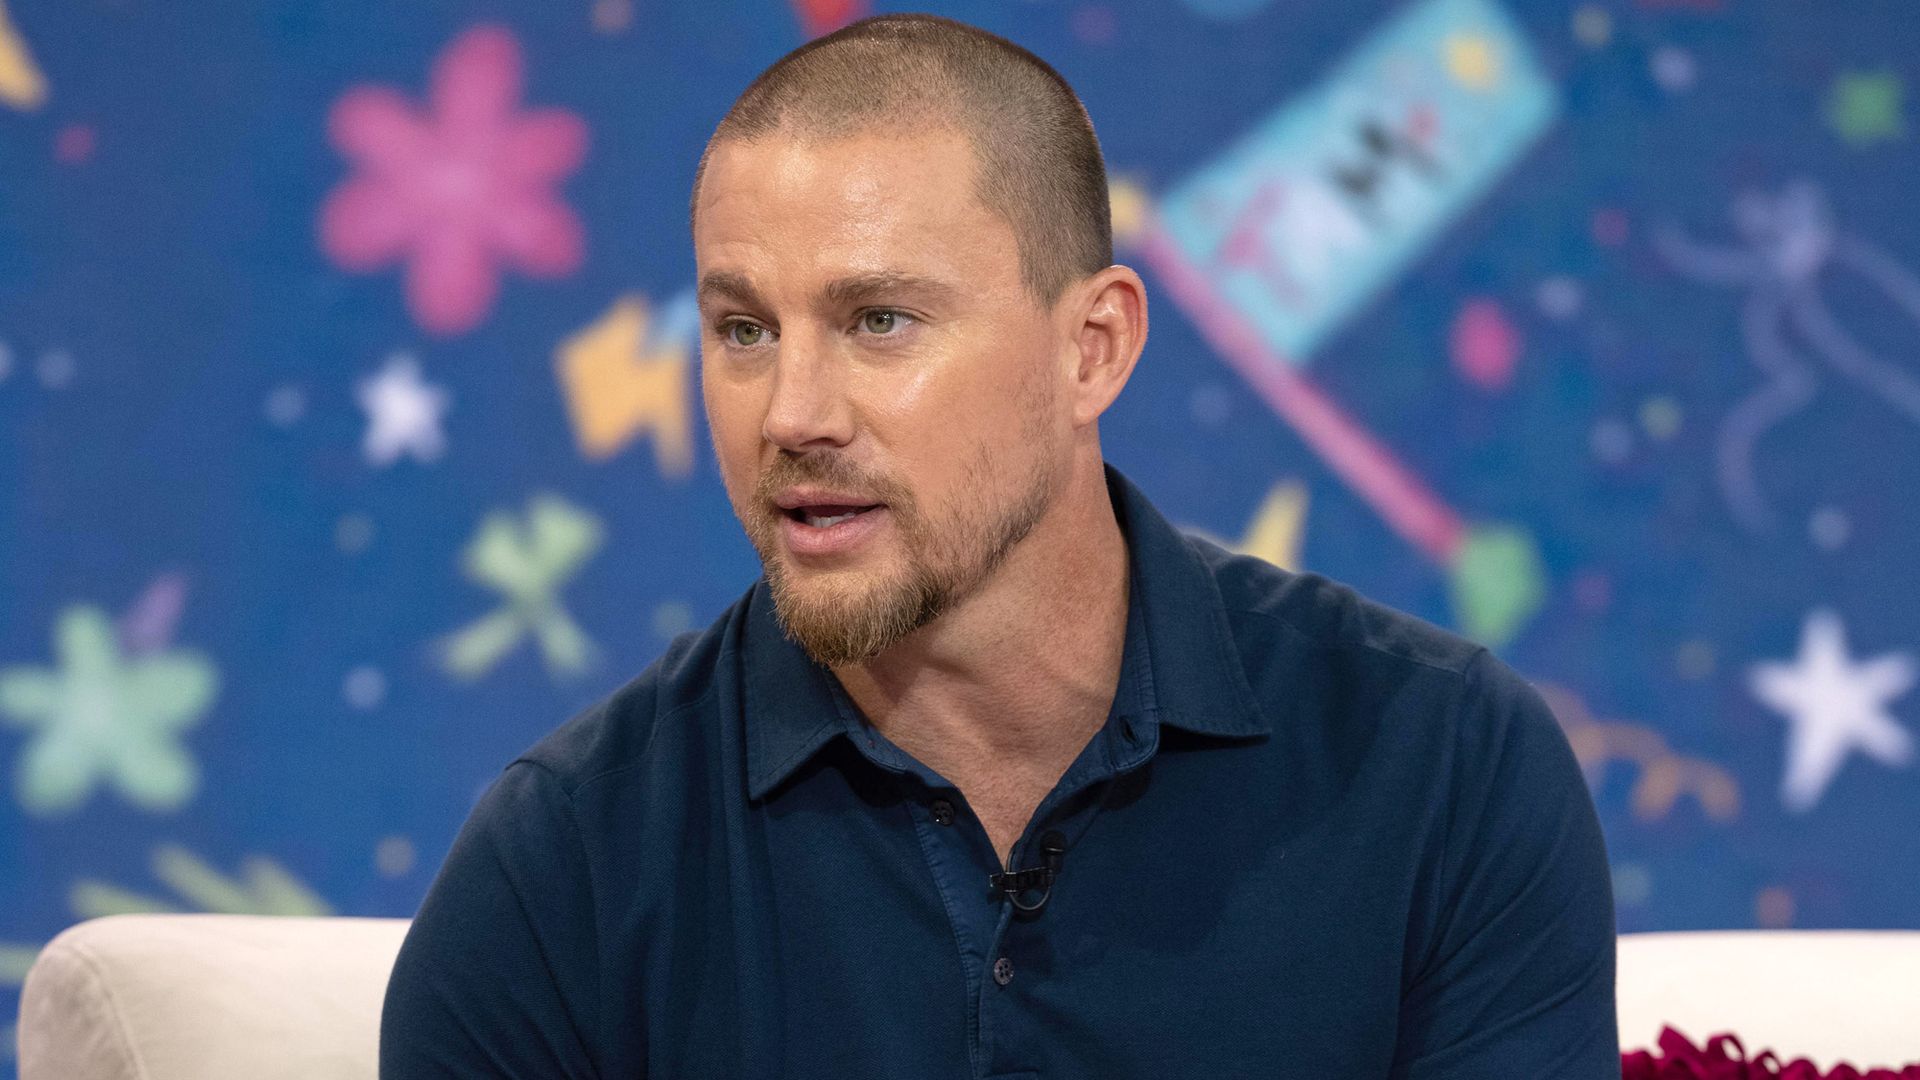 Channing Tatum opens up about his struggles as a single dad